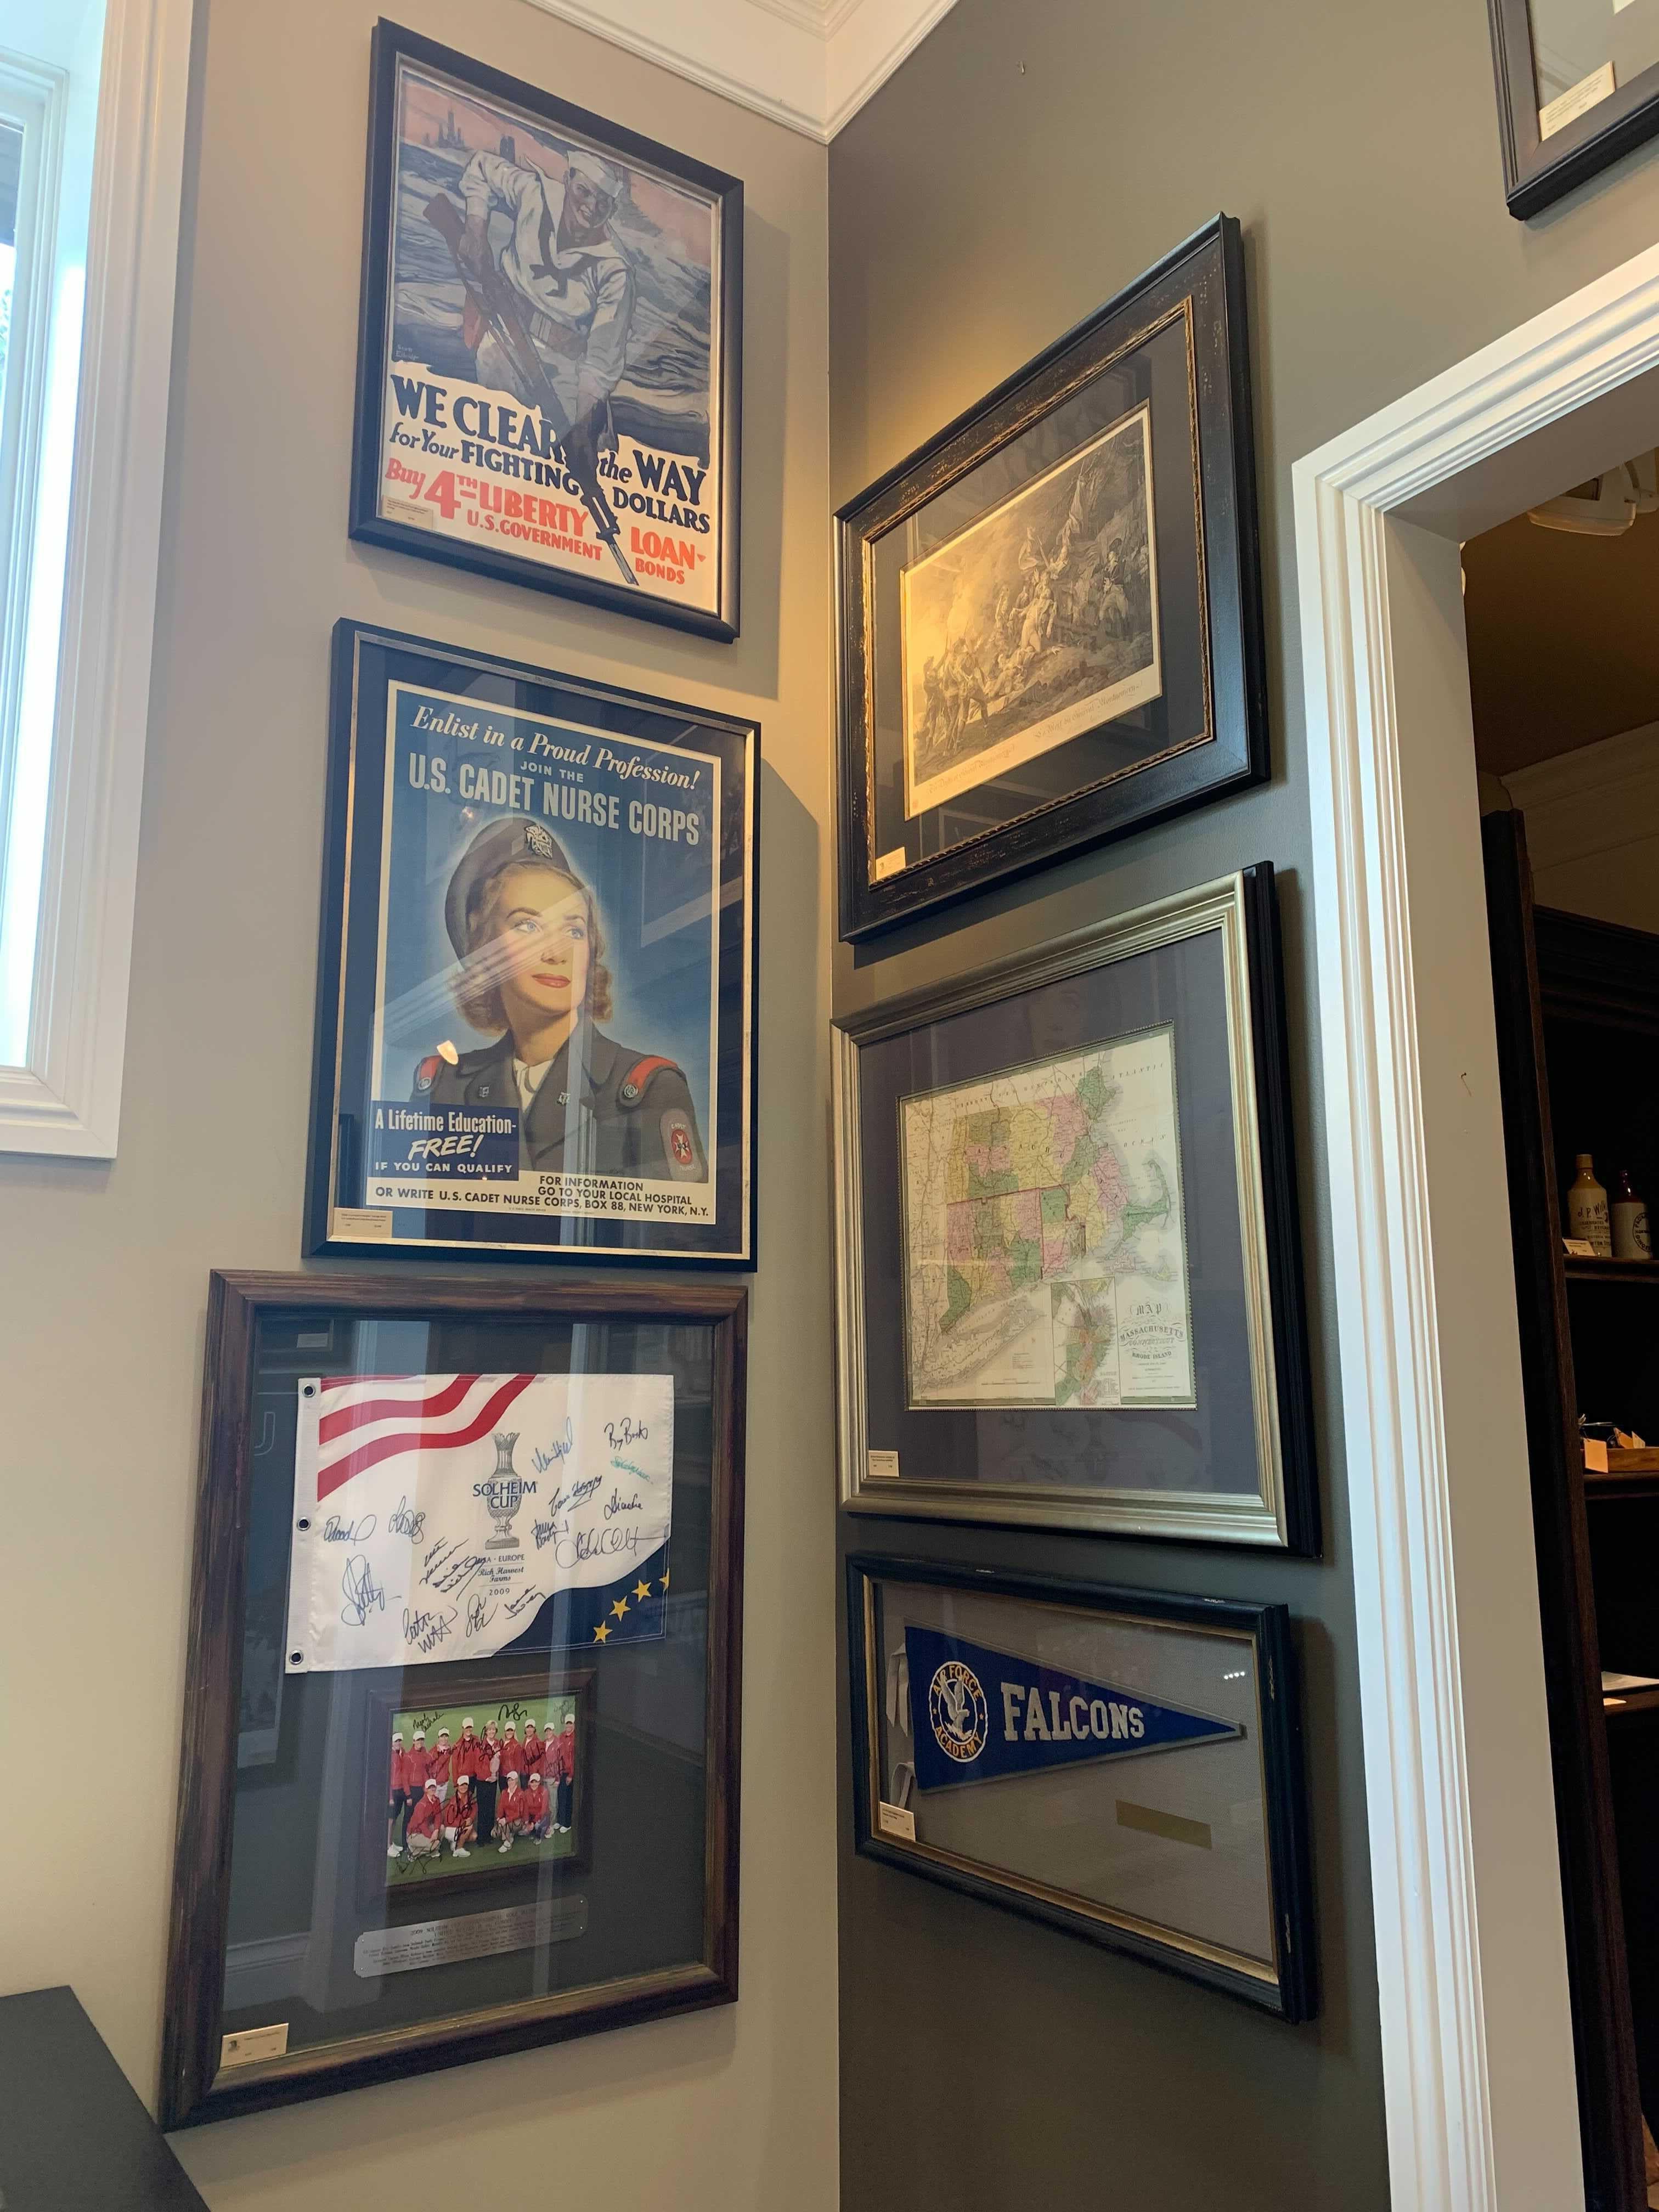 Solheim Cup Matches U.S. & European Team Signed Photo & Flag, Circa 2009 In Good Condition For Sale In Colorado Springs, CO